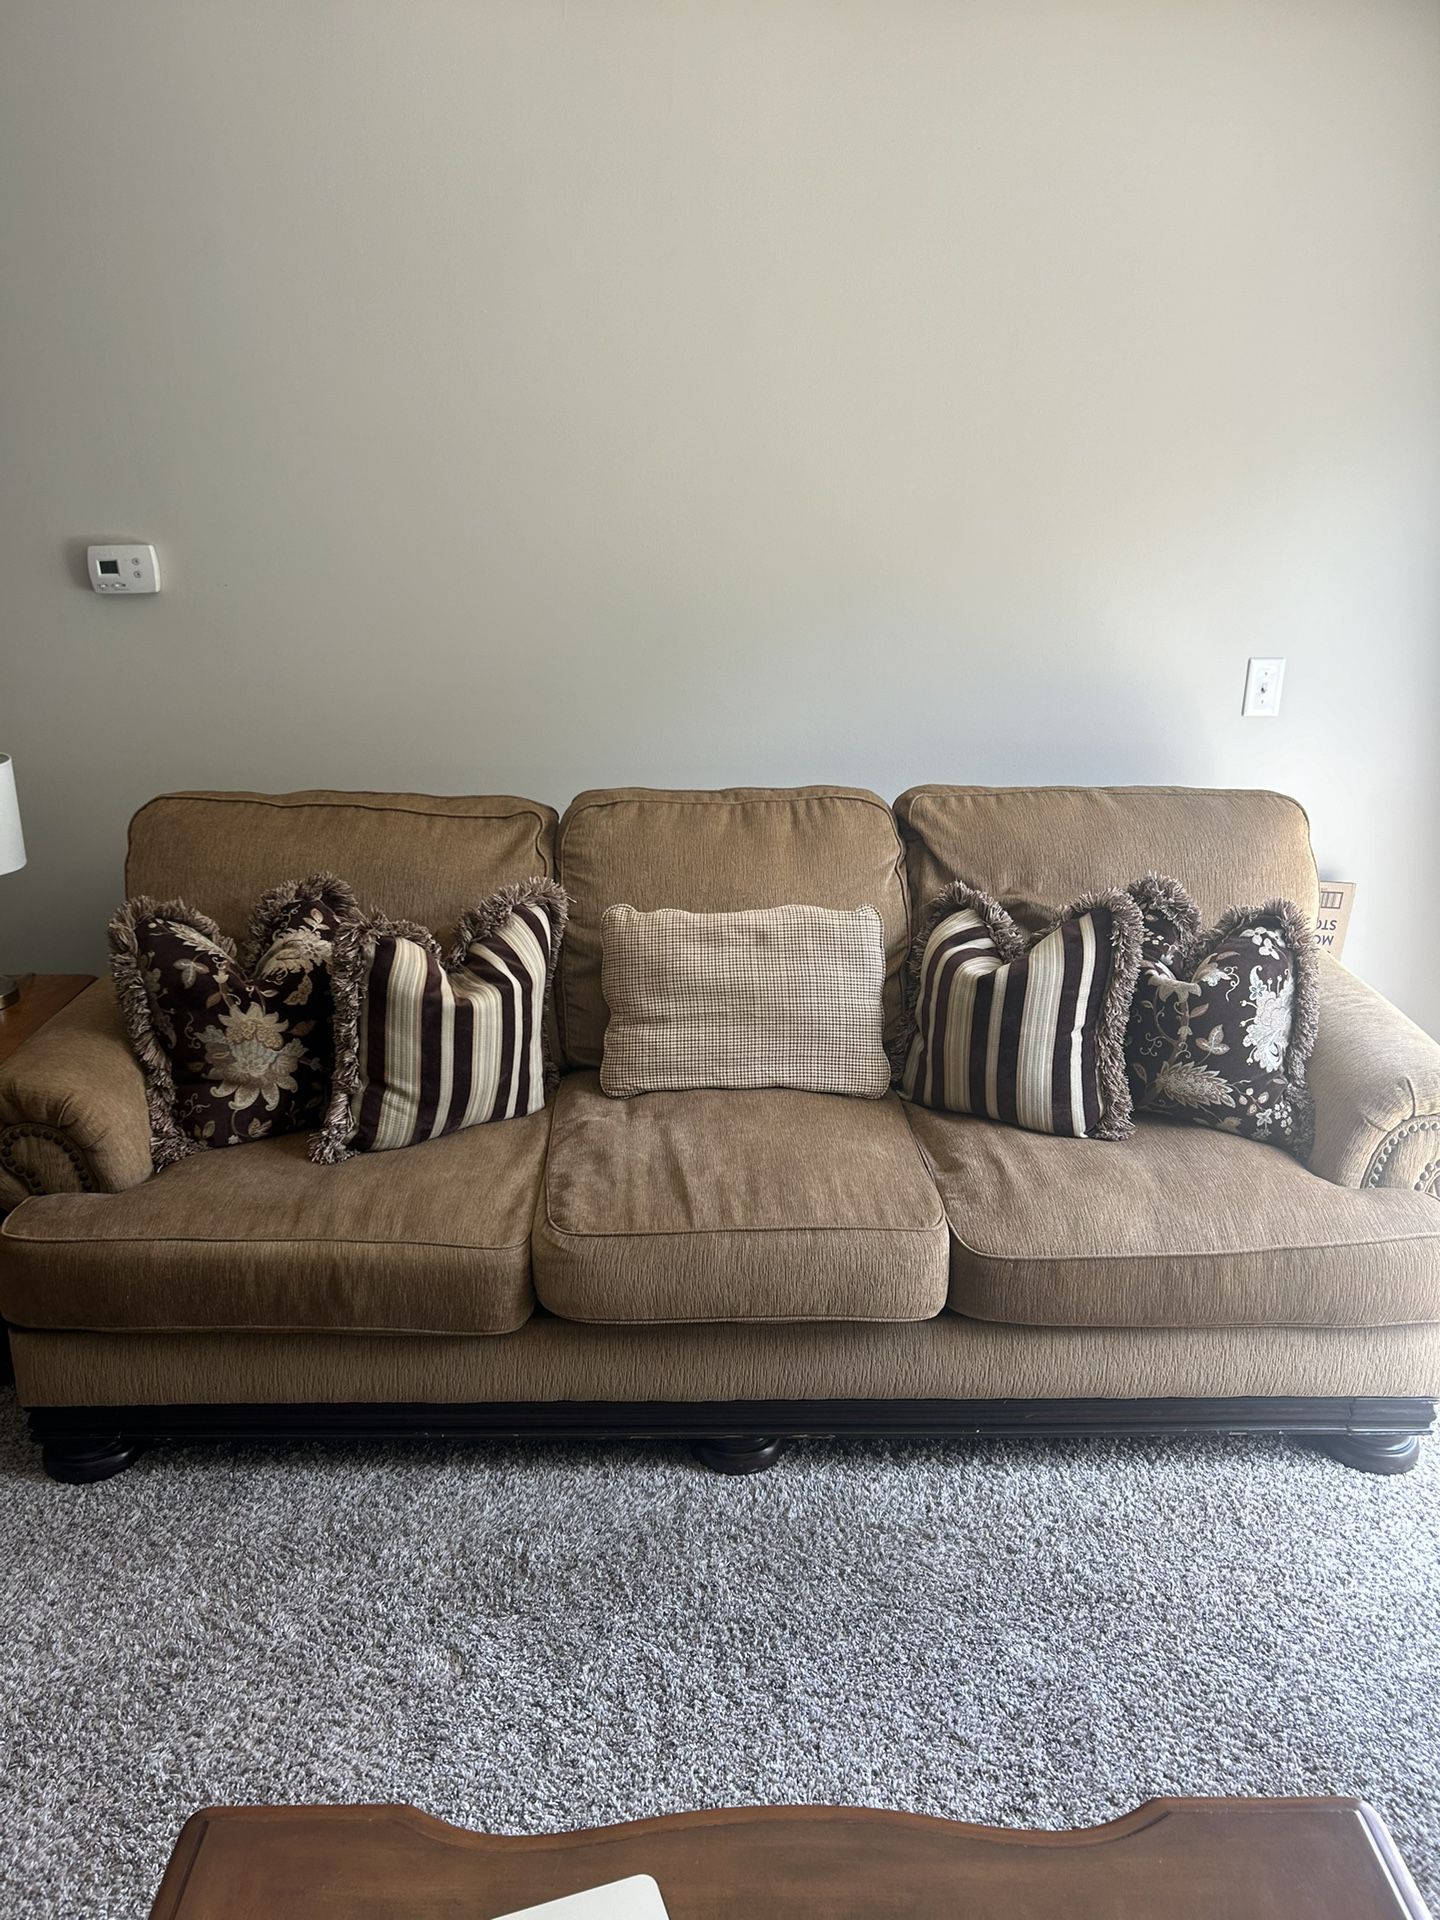 Large 3 Cushion Couch And Pillows 